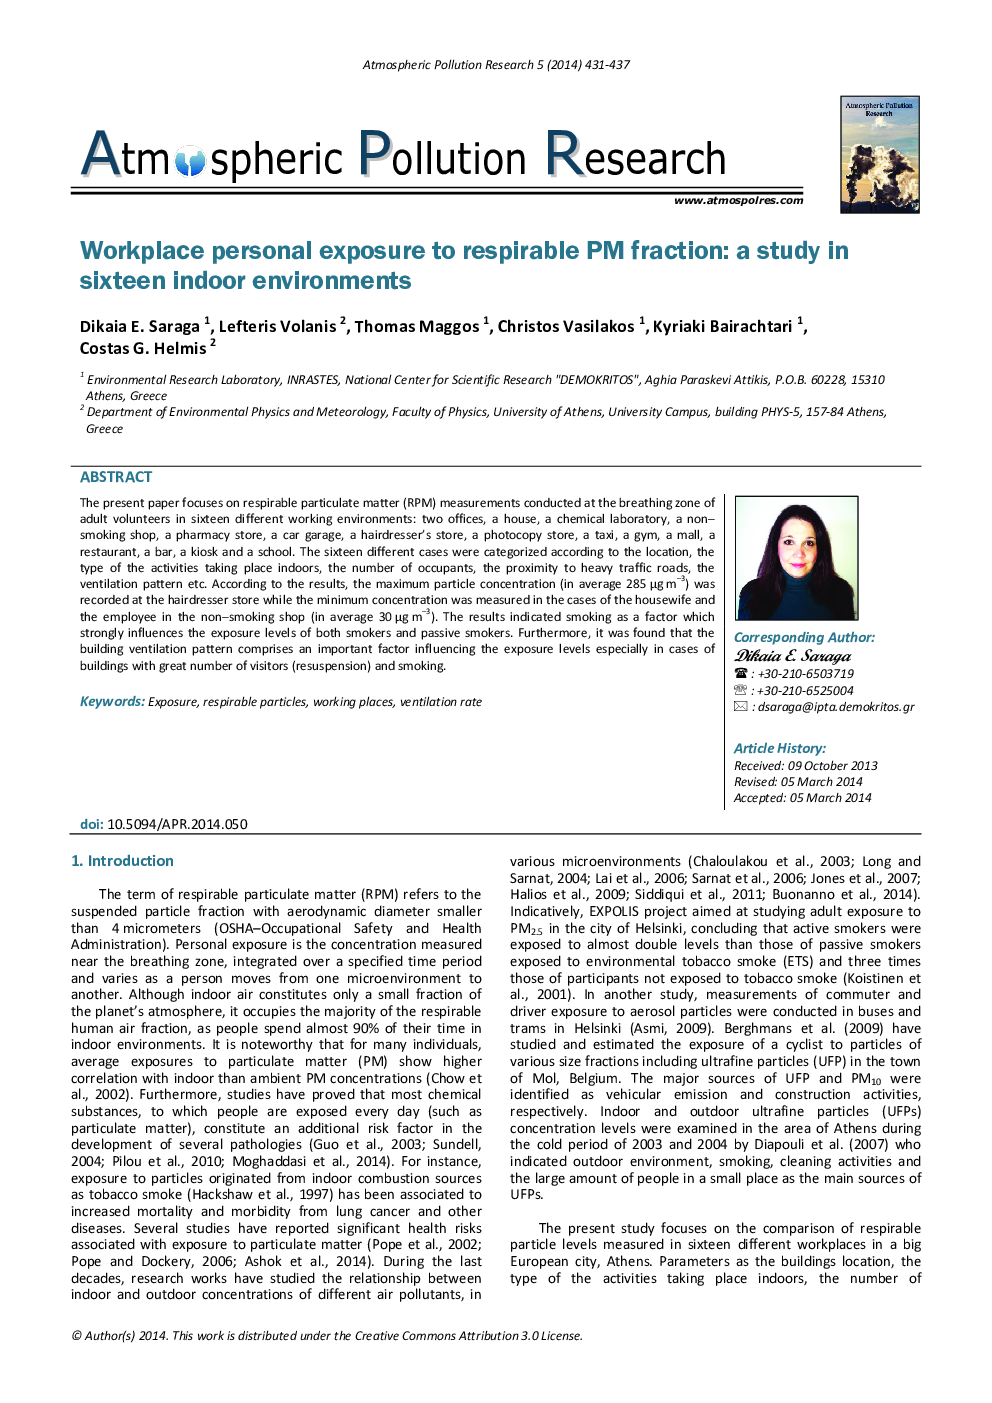 Workplace personal exposure to respirable PM fraction: a study in sixteen indoor environments